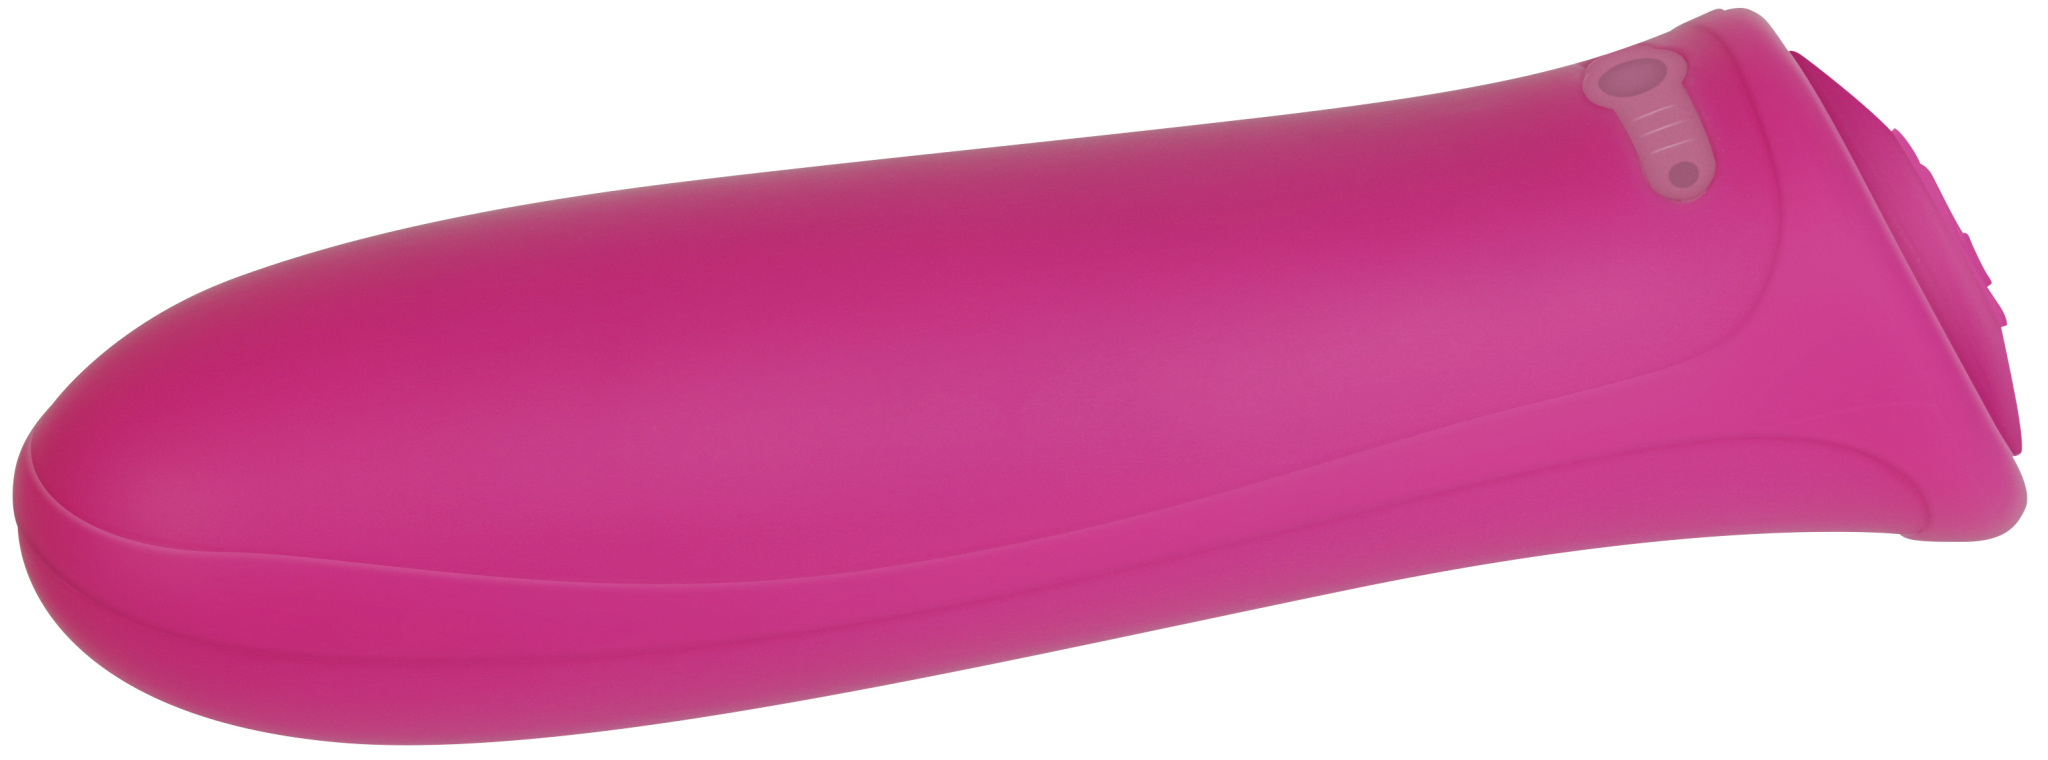 PRETTY-IN-PINK-SILICONE-RECHARGEABLE-II.jpg